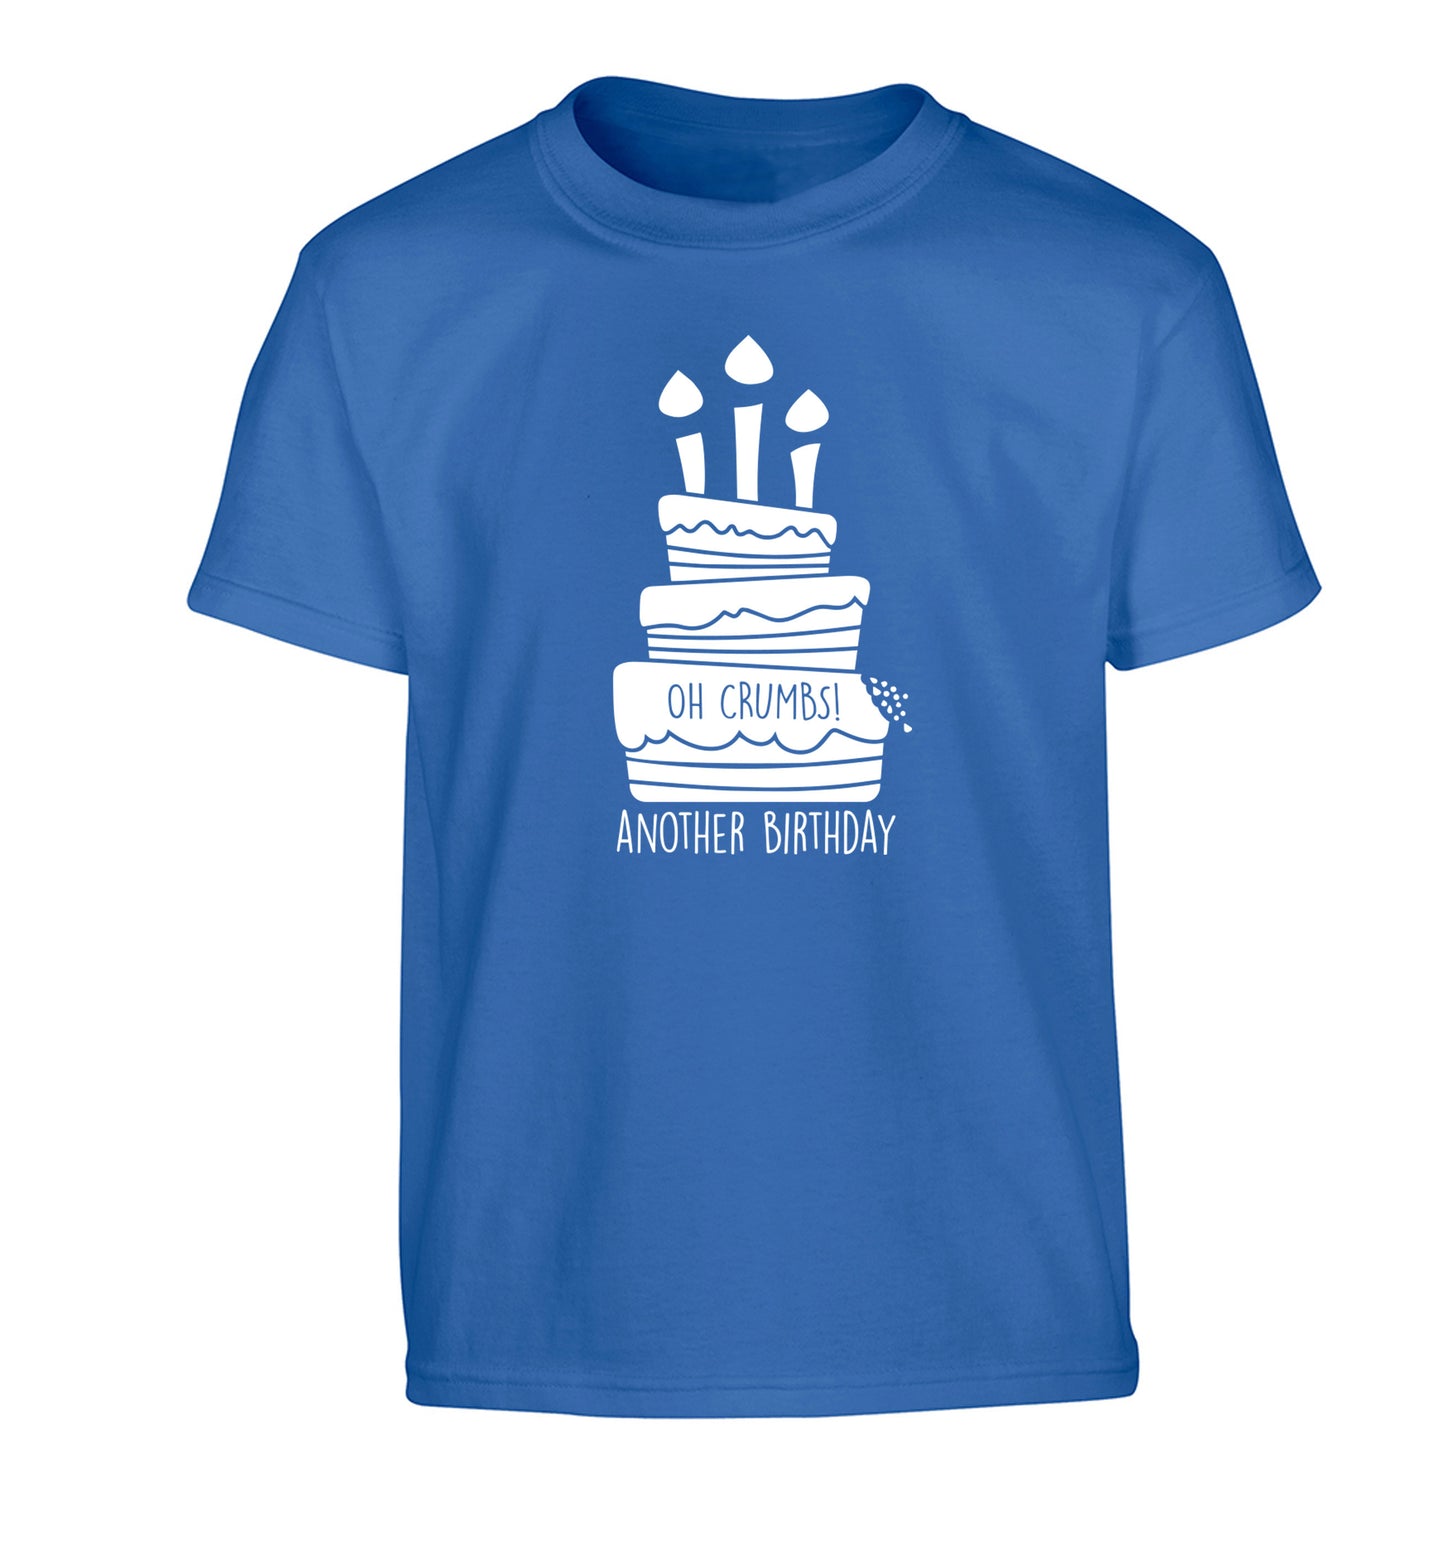 Oh crumbs another birthday! Children's blue Tshirt 12-14 Years